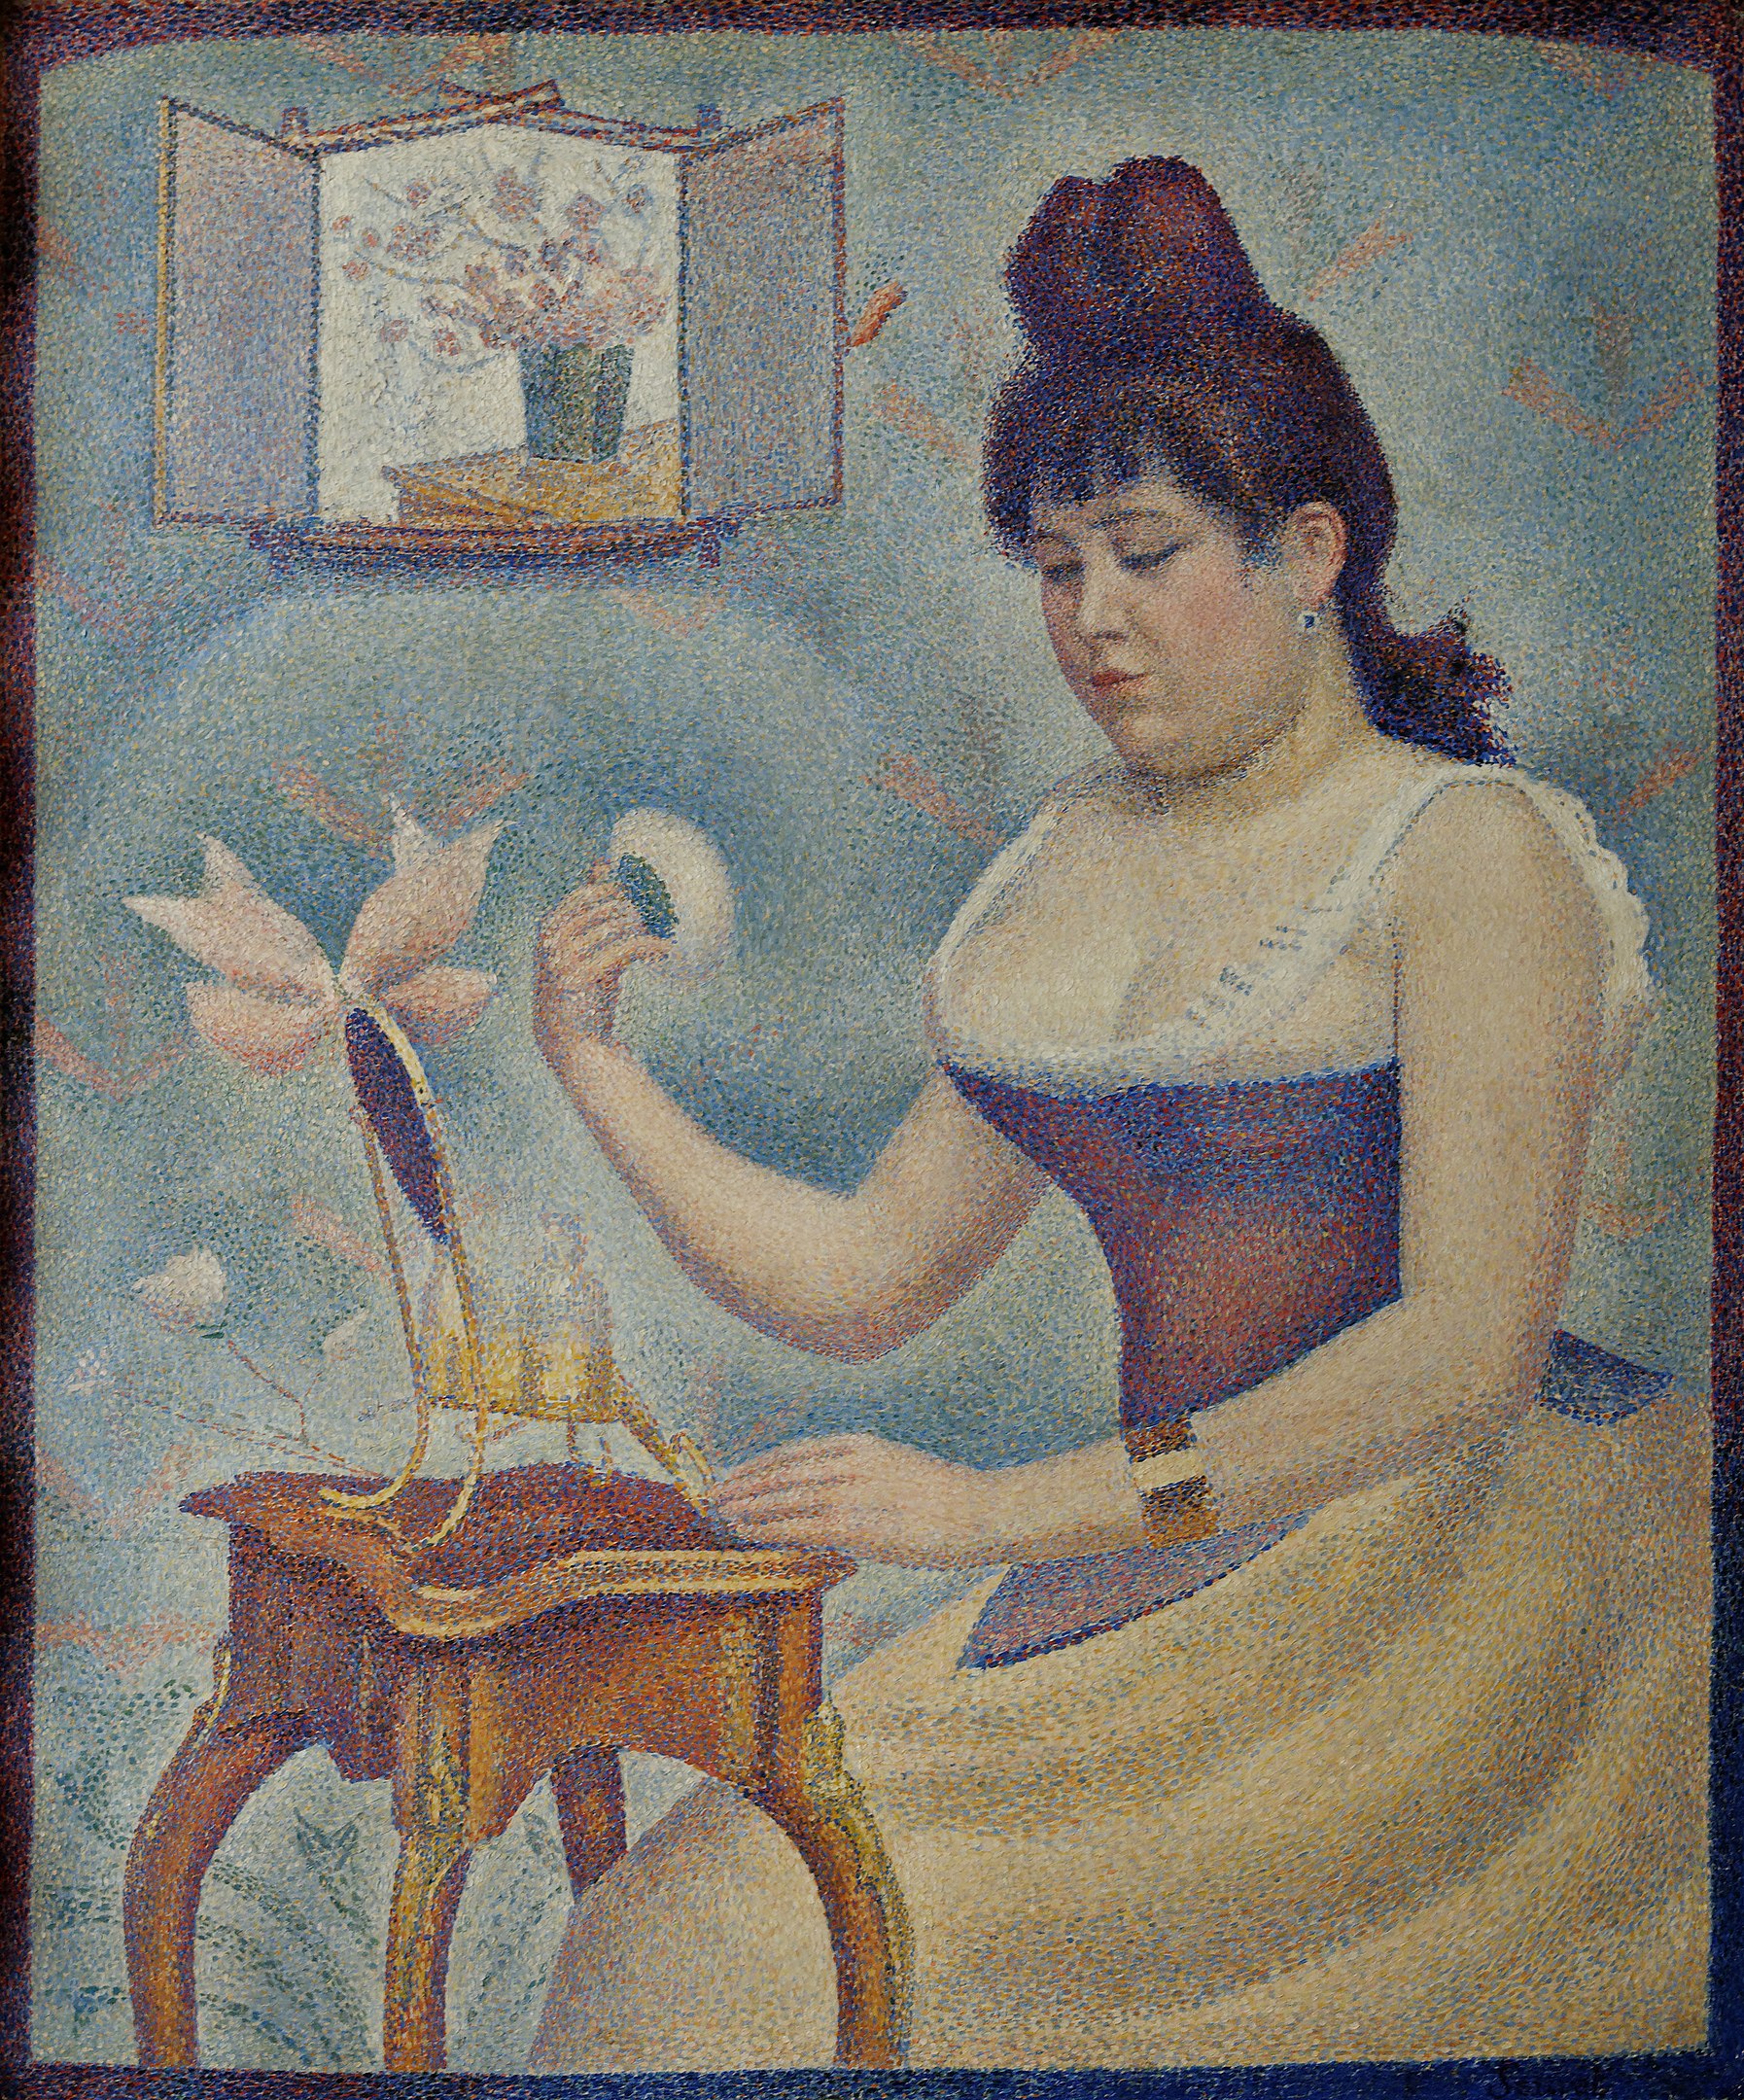 Young Woman Powdering Herself by Georges Seurat - 1889-90 - 95.5 x 79.5 cm The Courtauld Gallery